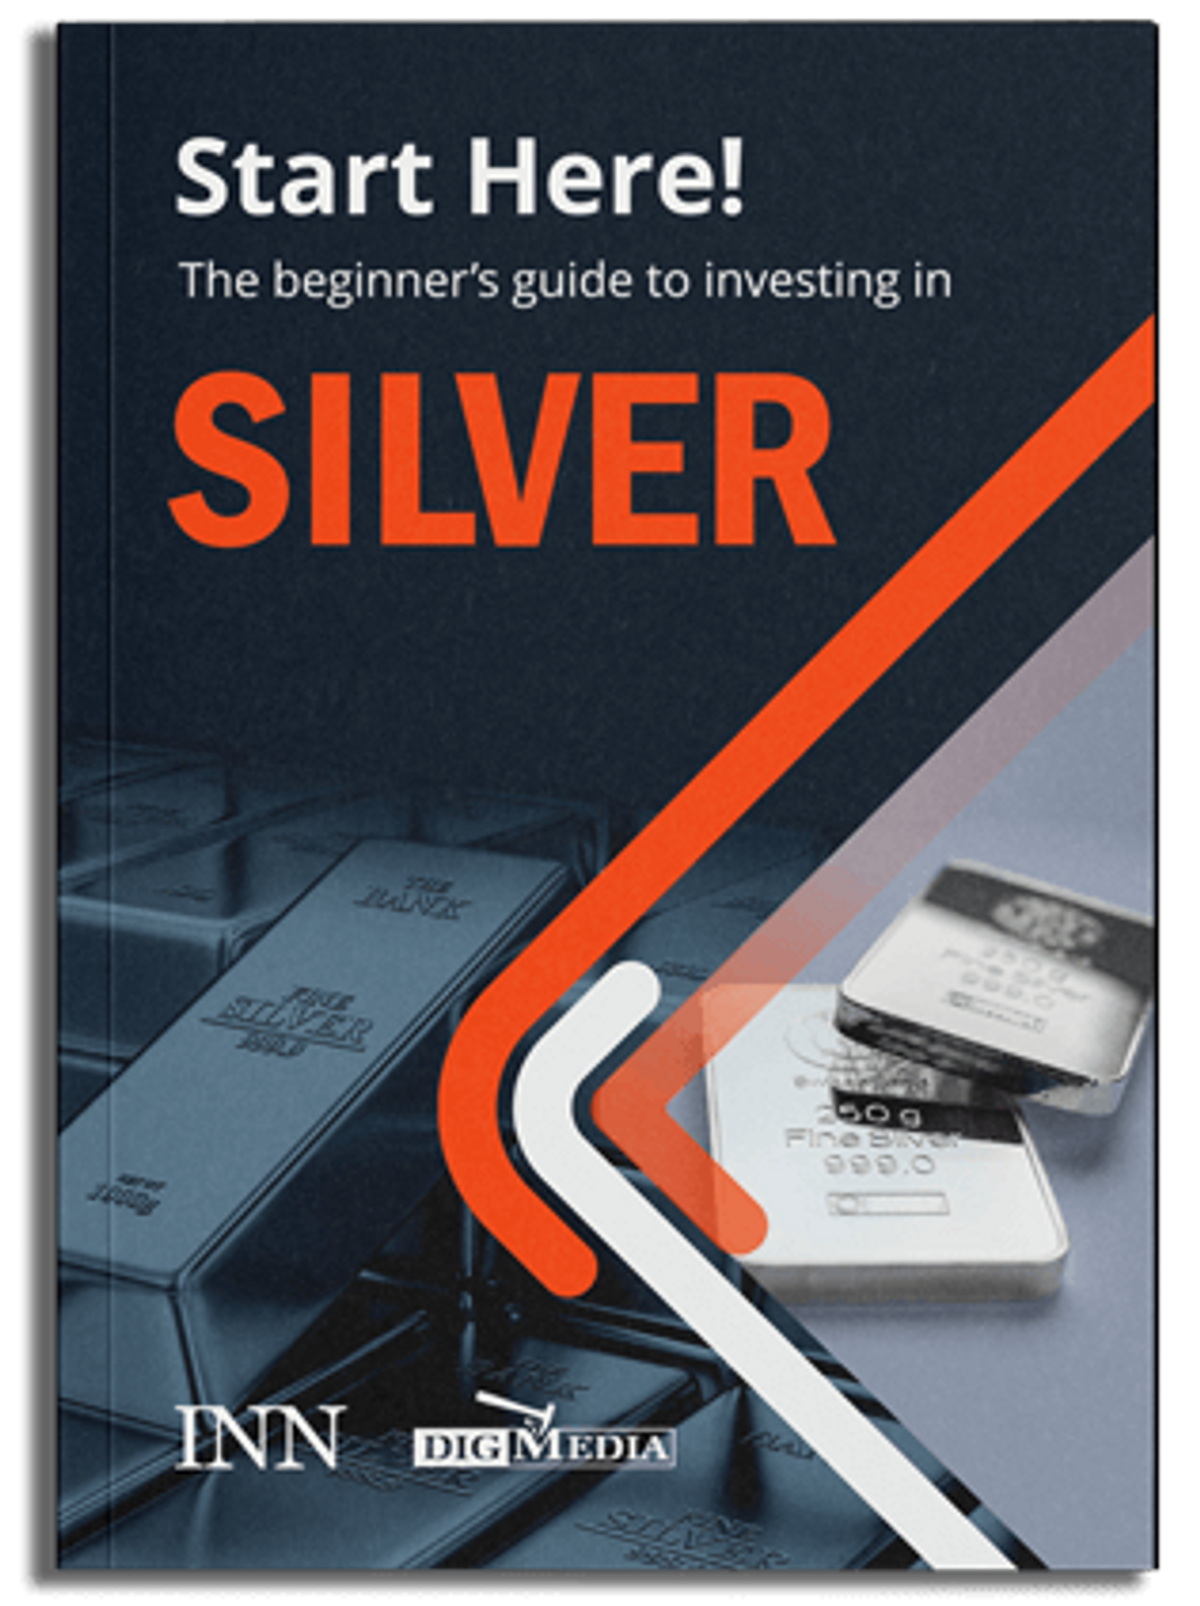 The Beginner's Guide to Investing in Silver